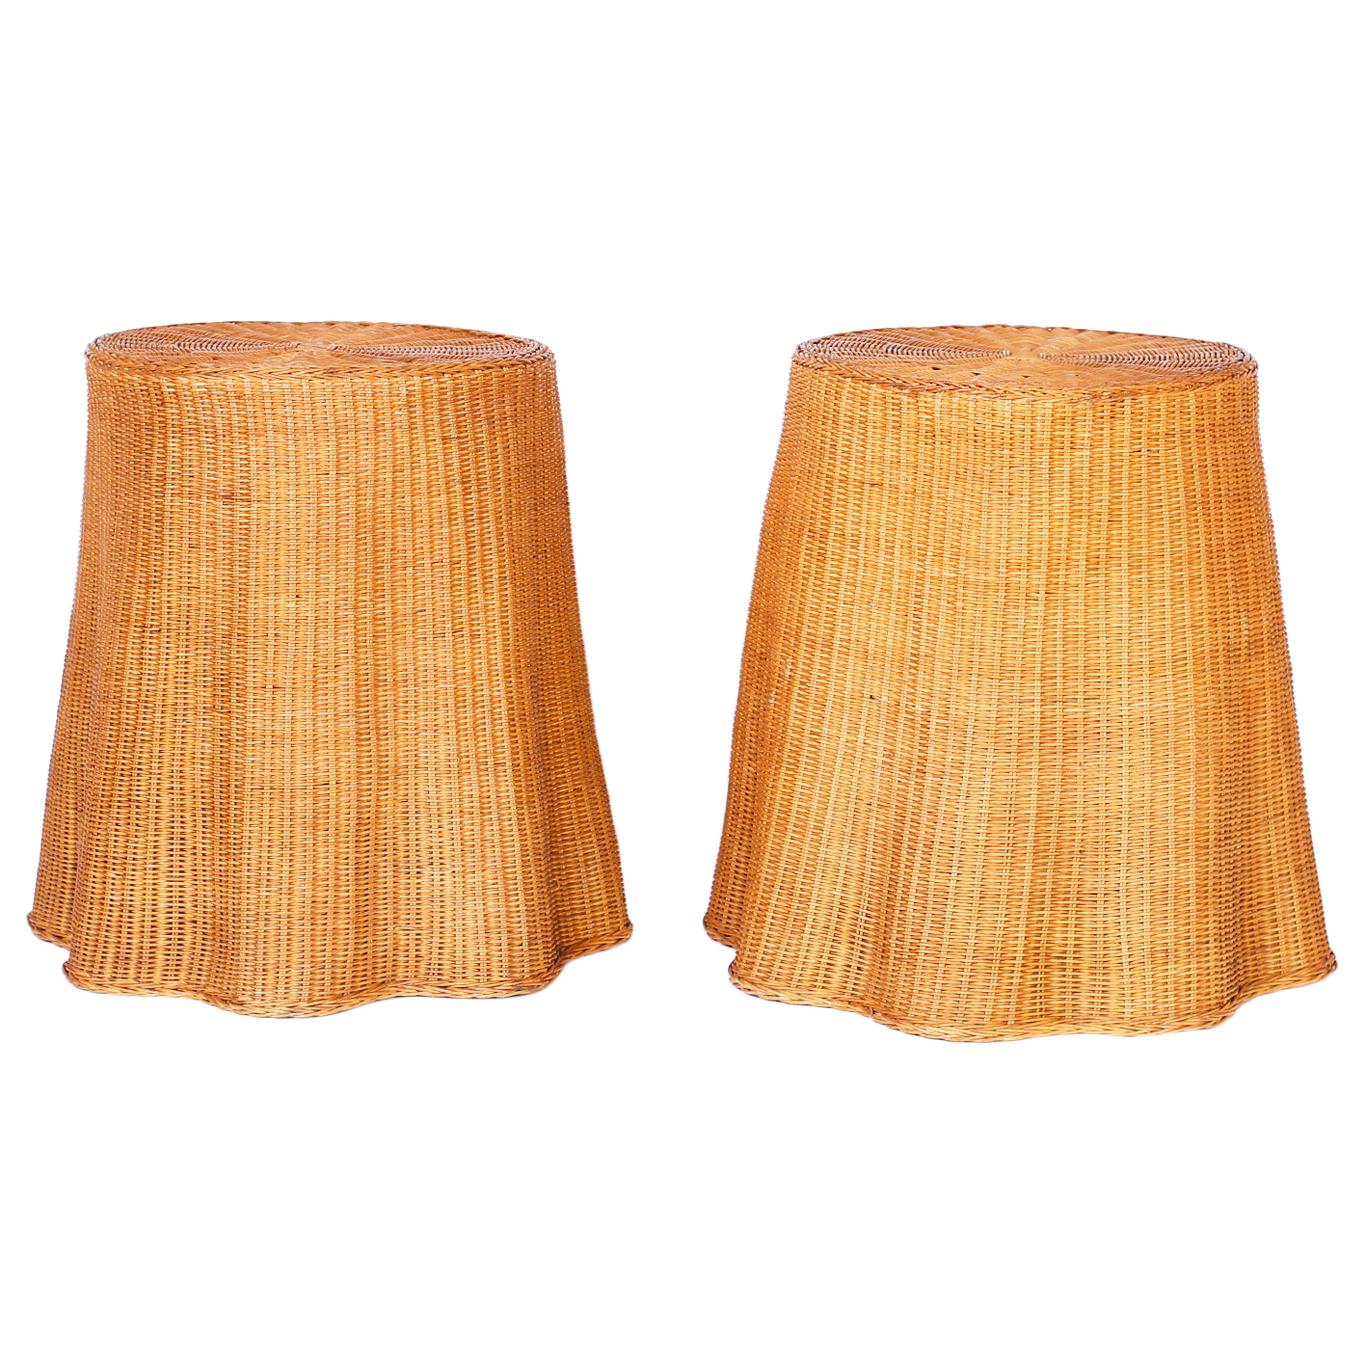 Pair of Midcentury Wicker Drape Tables or Stands